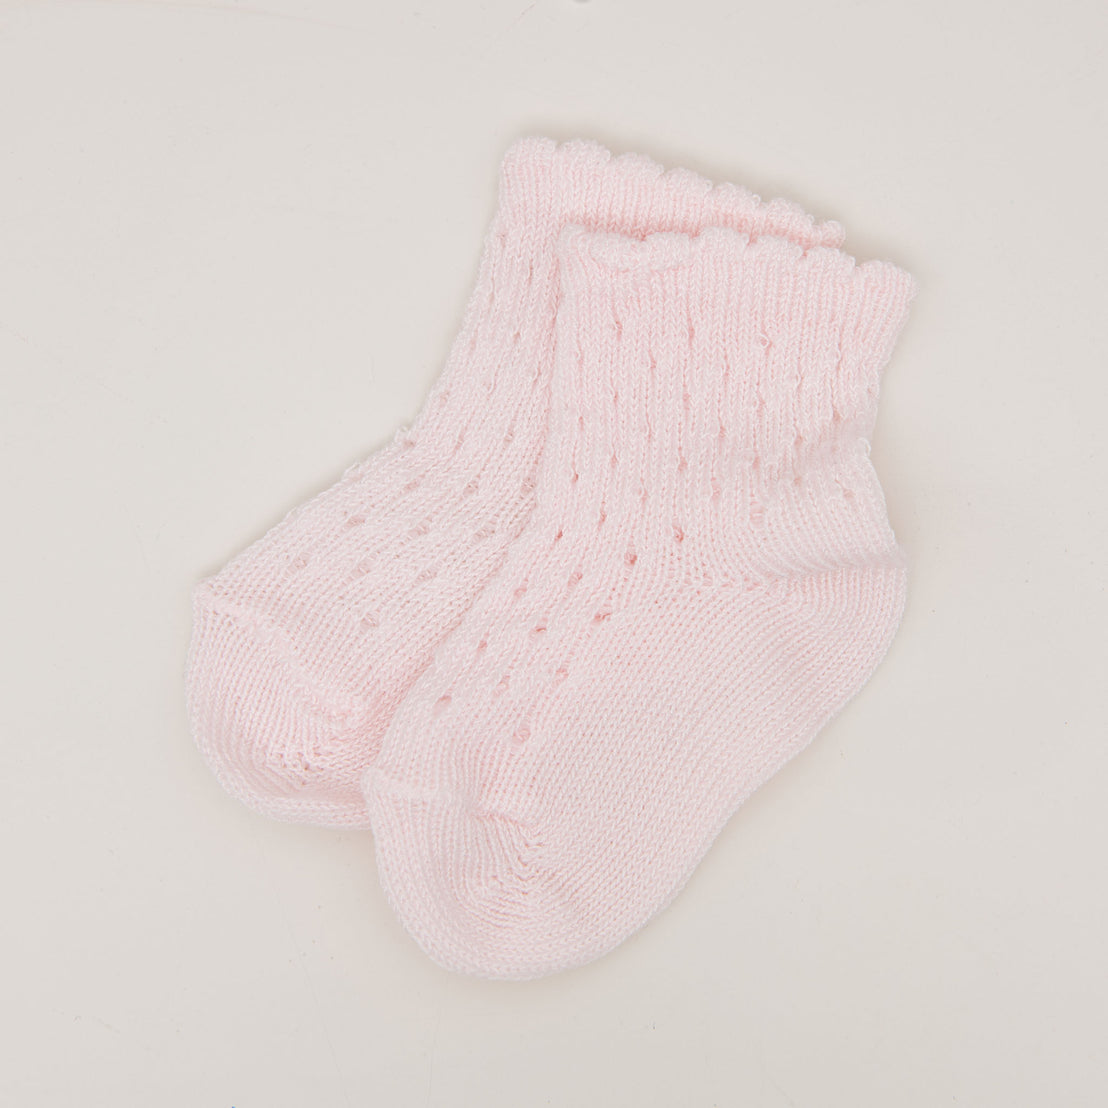 A pair of light pink Scallop Edge Crochet Socks with a delicate pattern, displayed flat on a white background.